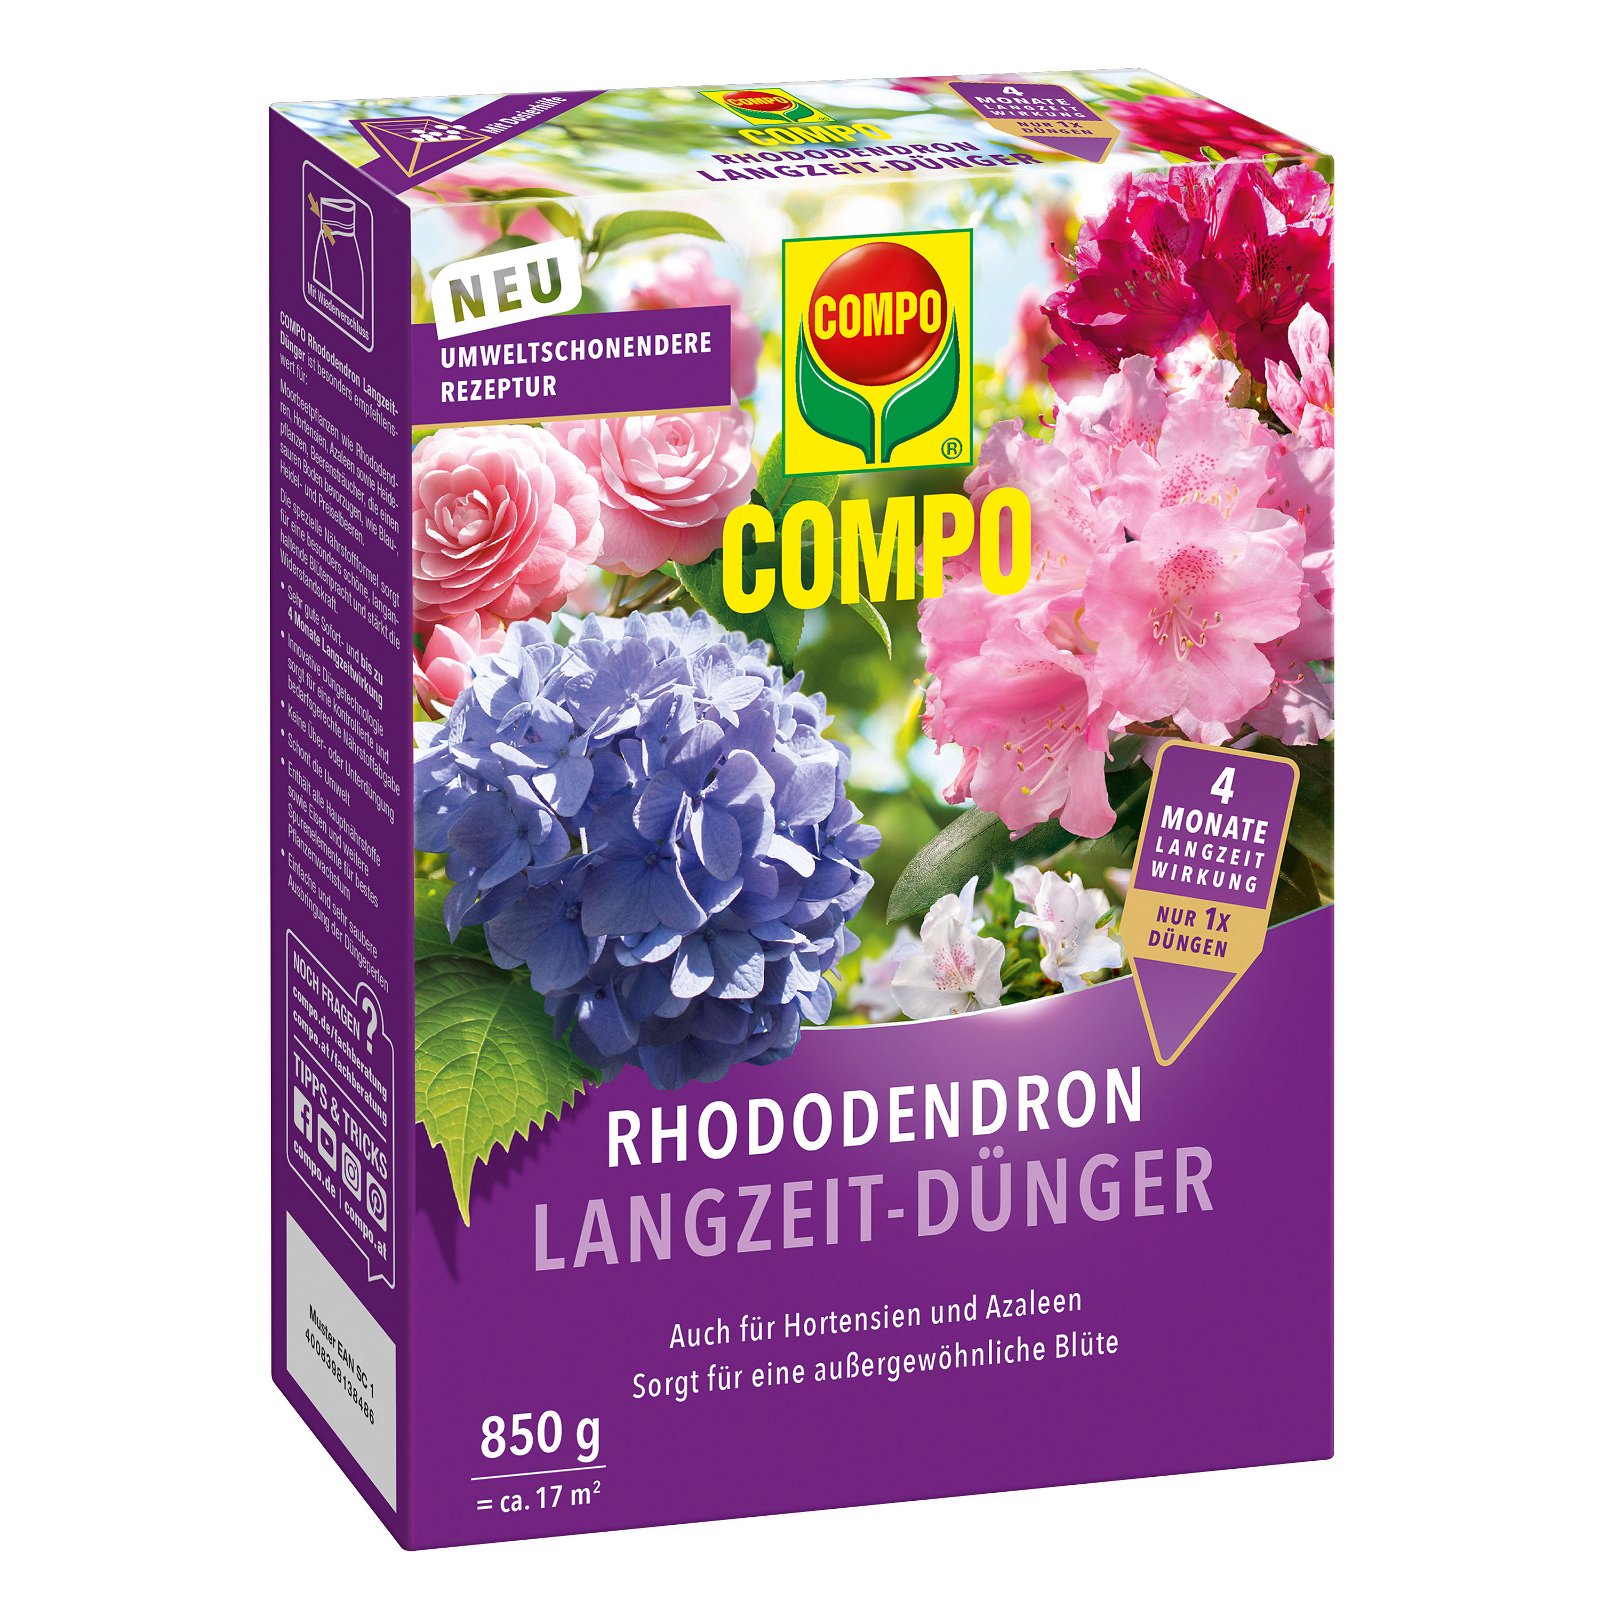 Compo Rhododendron LZ-Dünger, 850 g